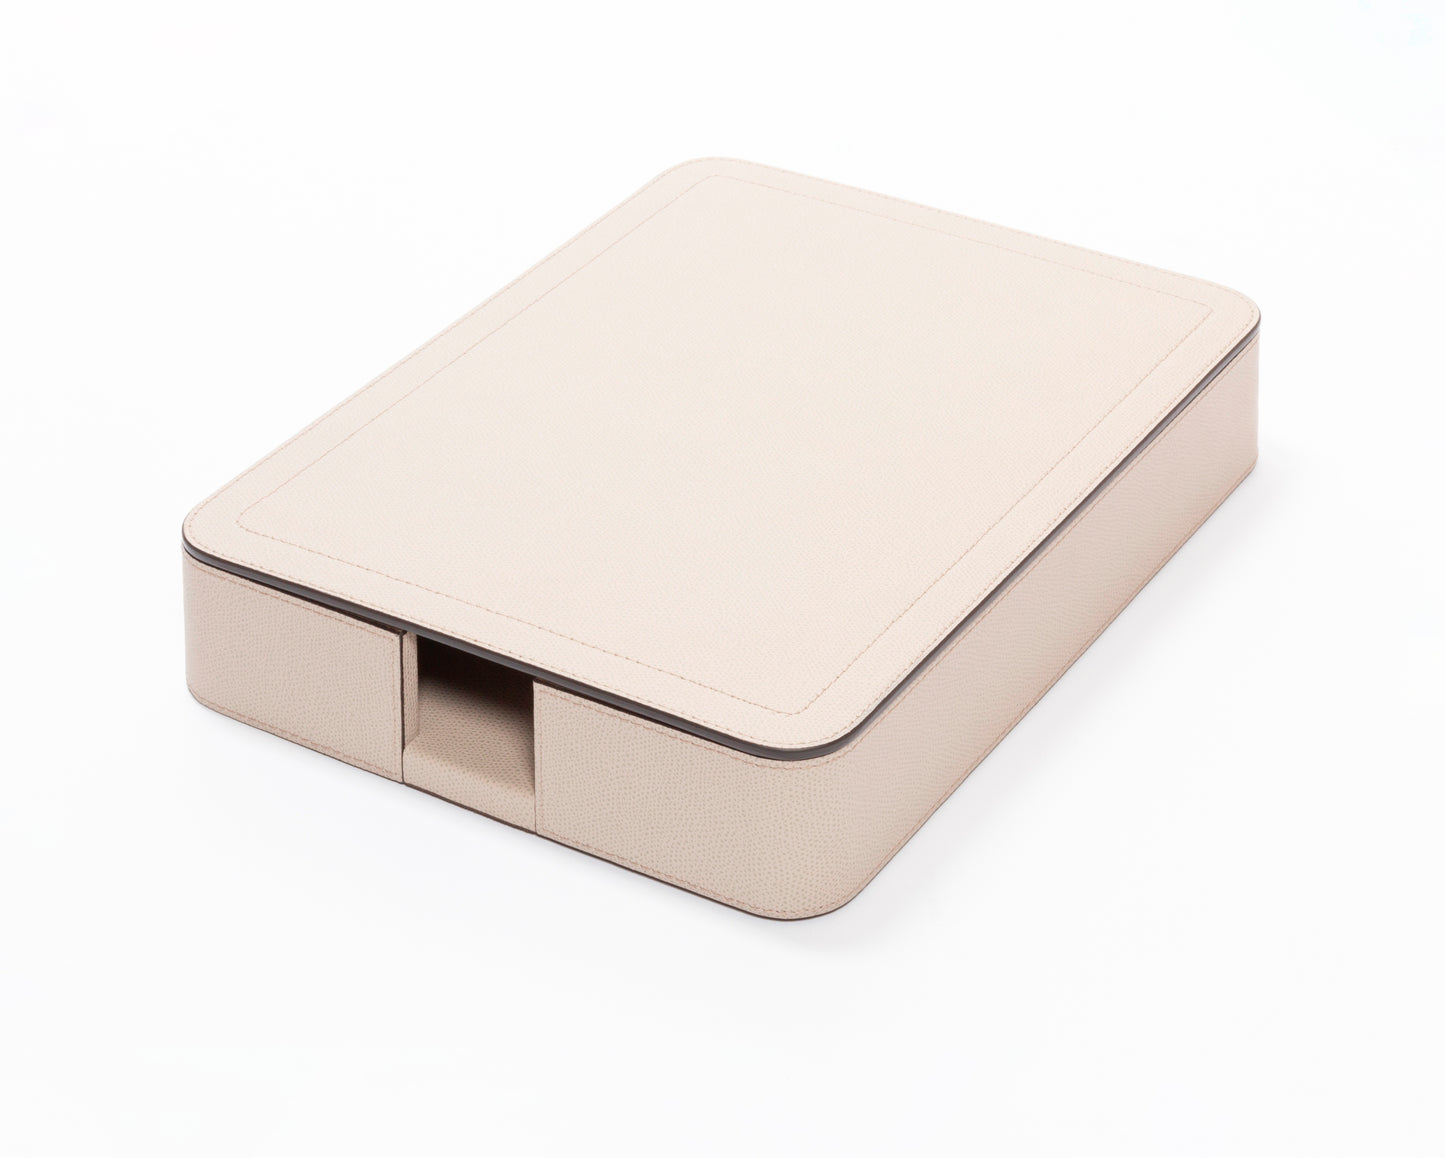 Giobagnara Polo A4 Paper Tray With Lid | 2Jour Concierge, #1 luxury high-end gift & lifestyle shop